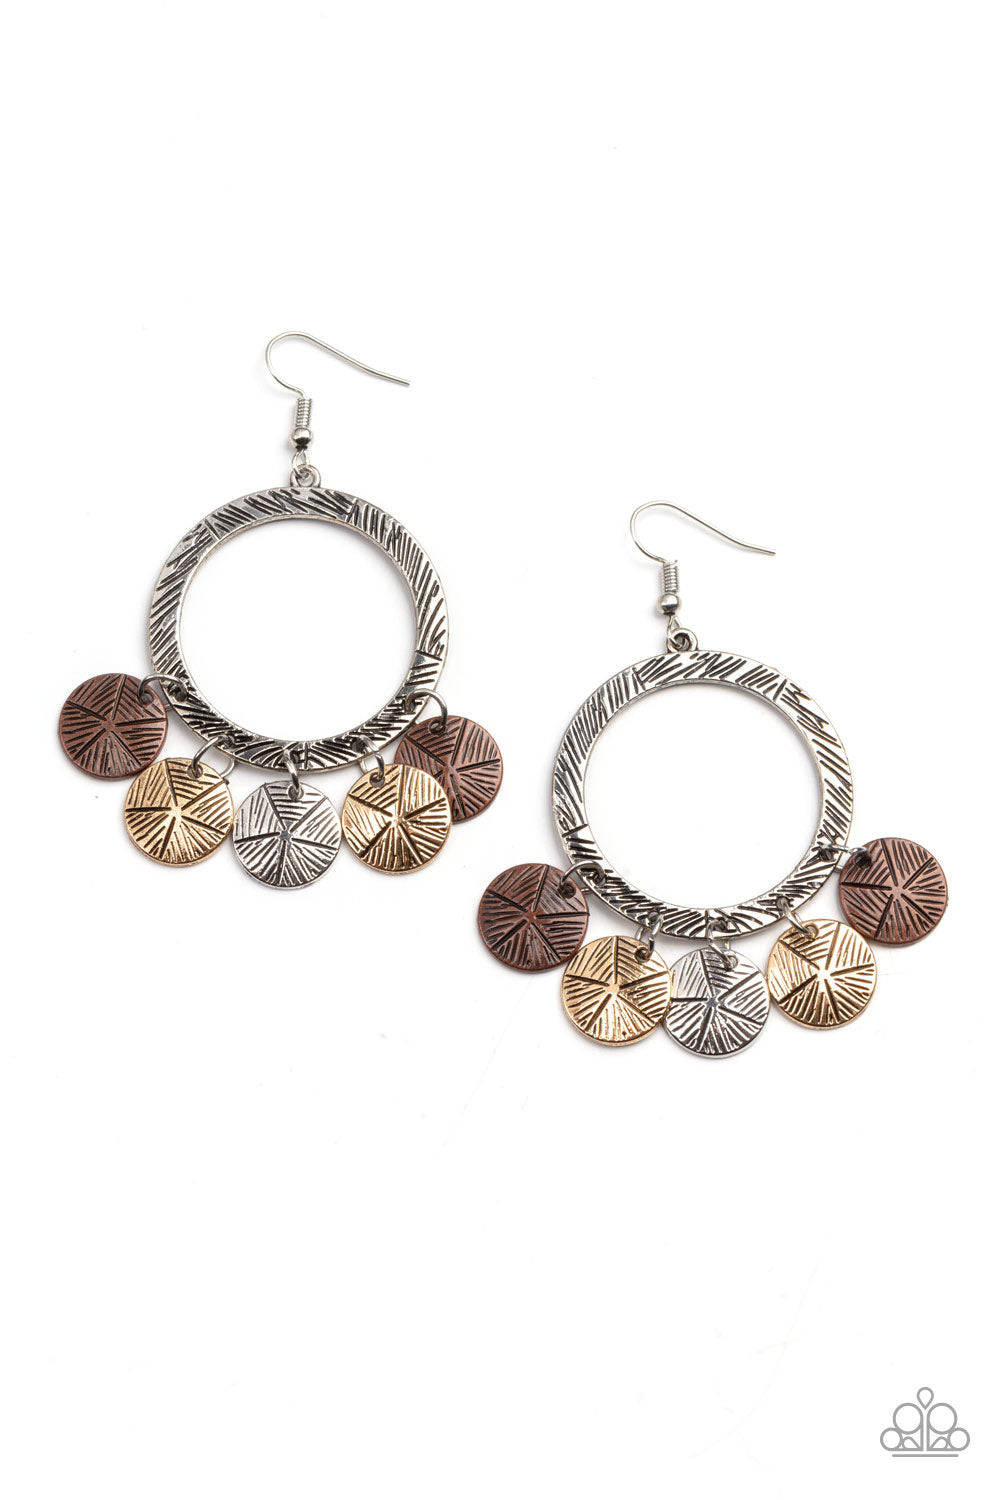 Trinket Tease - Multi Etched Earrings haphazardly etched in gritty linear textures, an antiqued silver hoop gives way to a fringe of star stamped copper, gold, and silver discs. Earring attaches to a standard fishhook fitting.  Sold as one pair of earrings.